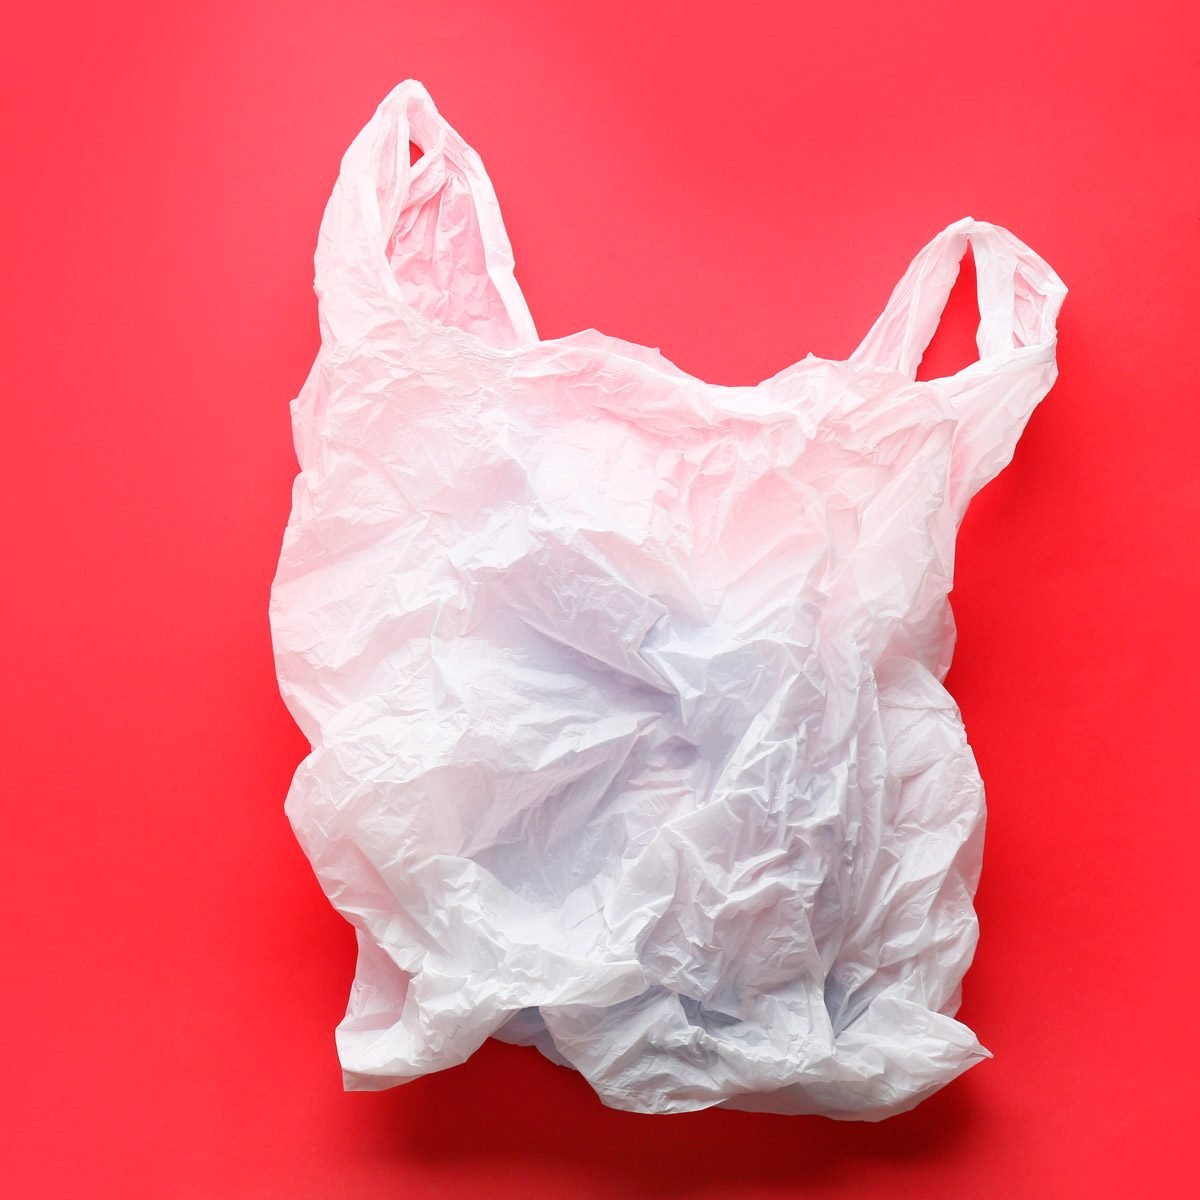 10 Ways to Organize and Store Plastic Bags